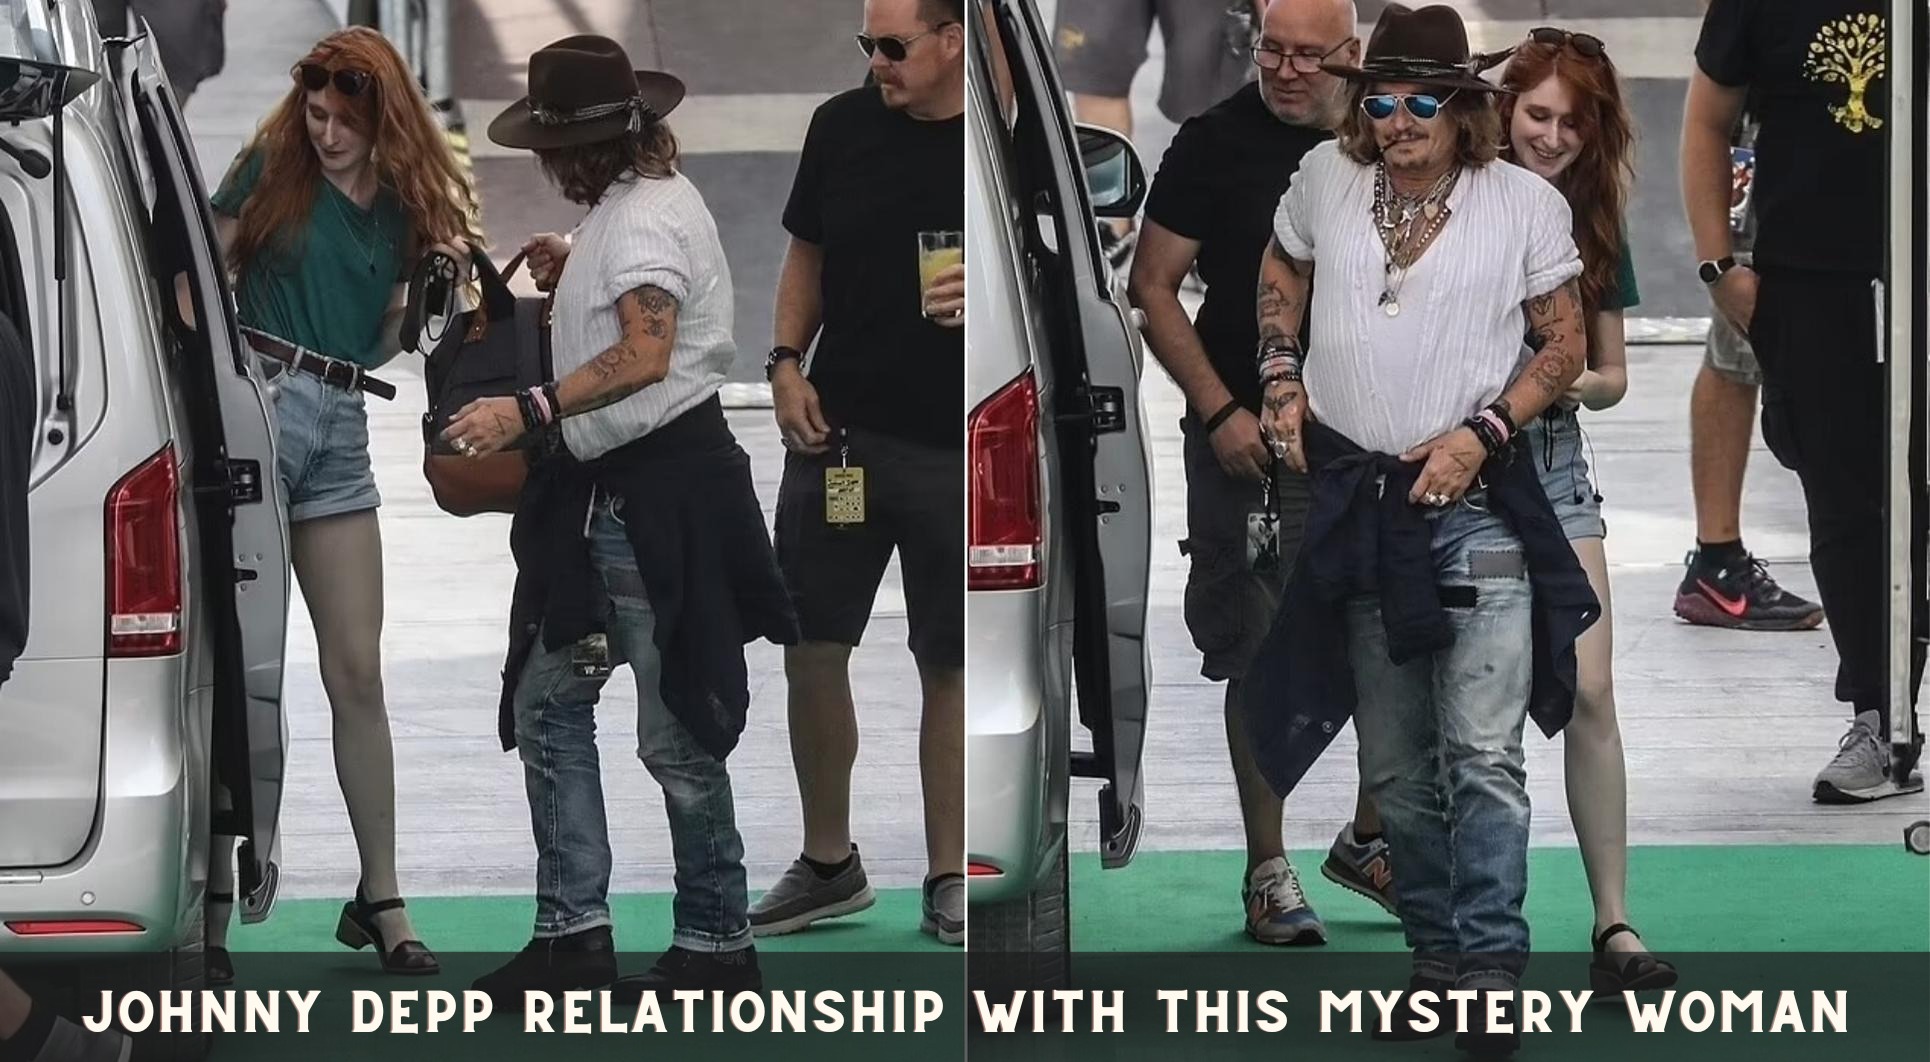 Johnny Depp relationship with this mystery woman